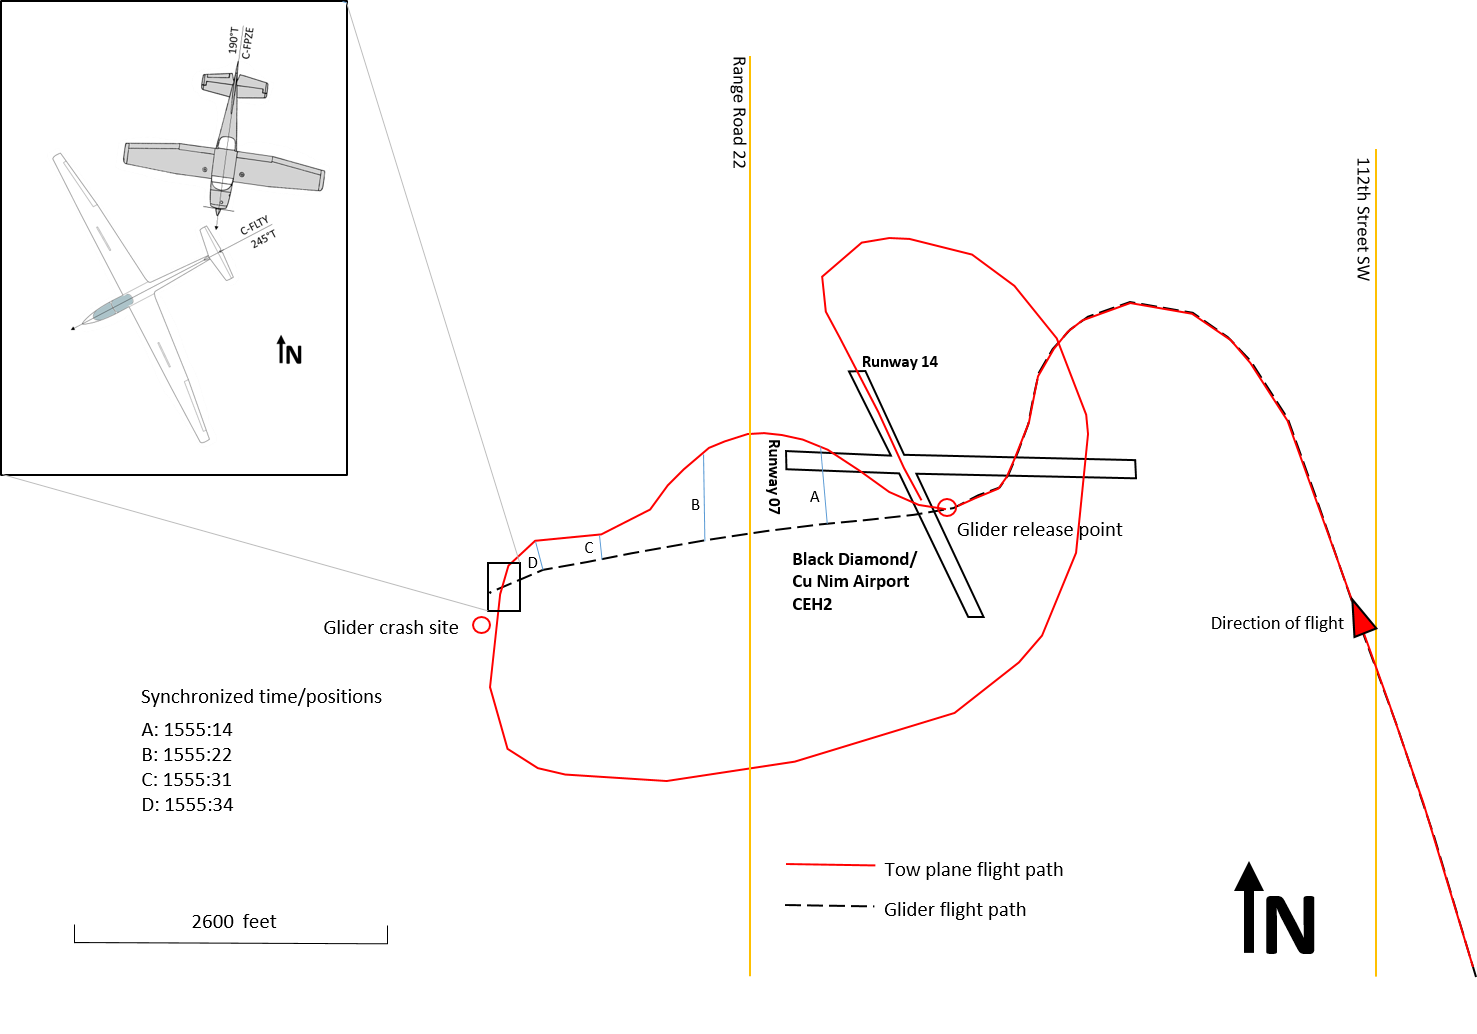 Overview of the tow plane and glider’s flight paths, with inset diagram showing the positions of the aircraft at the time of the collision (Source: TSB)